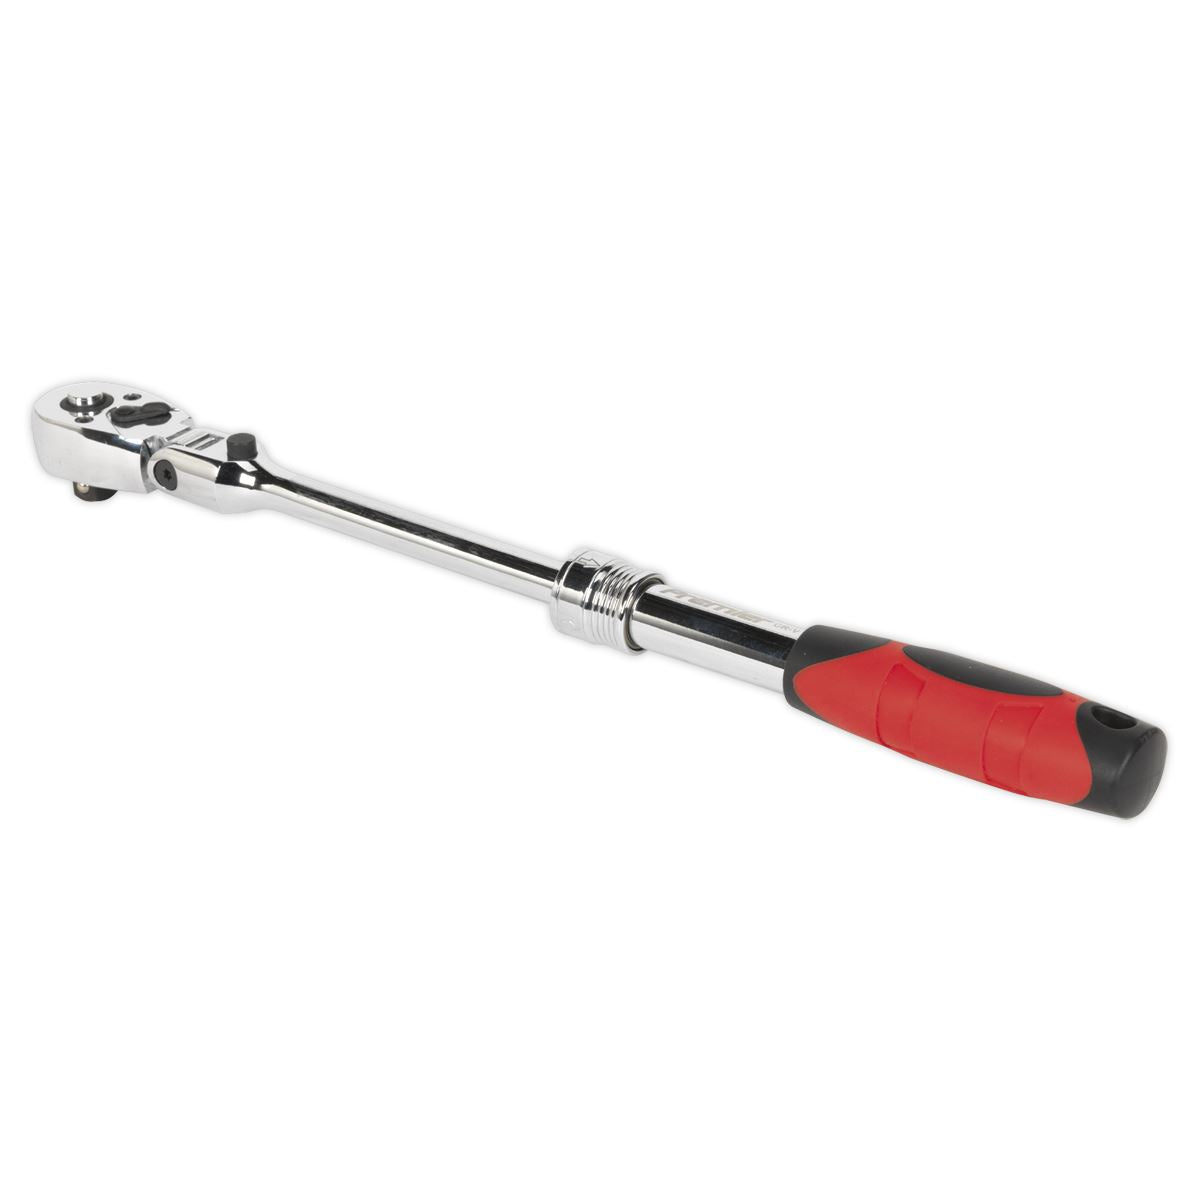 Sealey 3/8" Flexi-Head Extendable Ratchet Handle Socket Wrench 72 Tooth